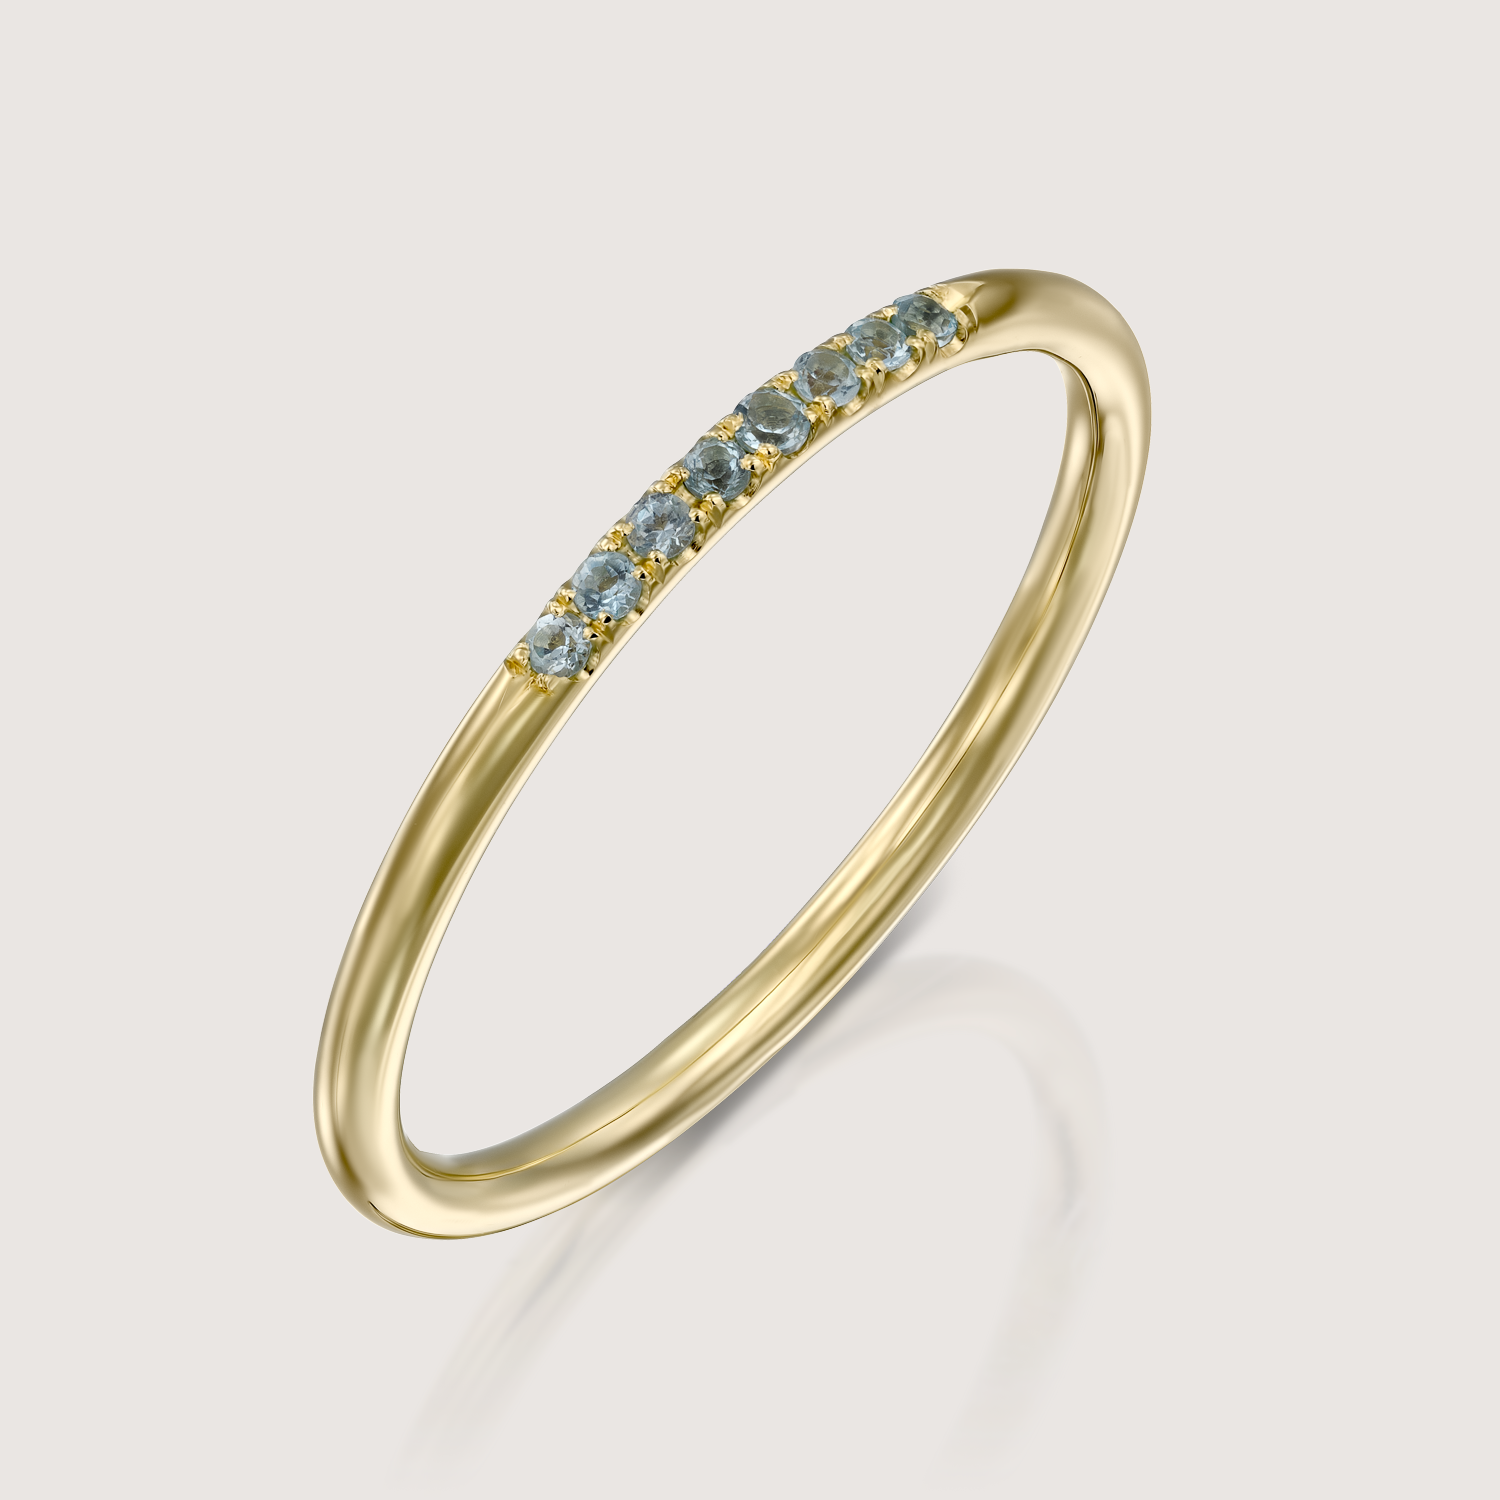 Kelly ring with Blue Topaz - Swiss